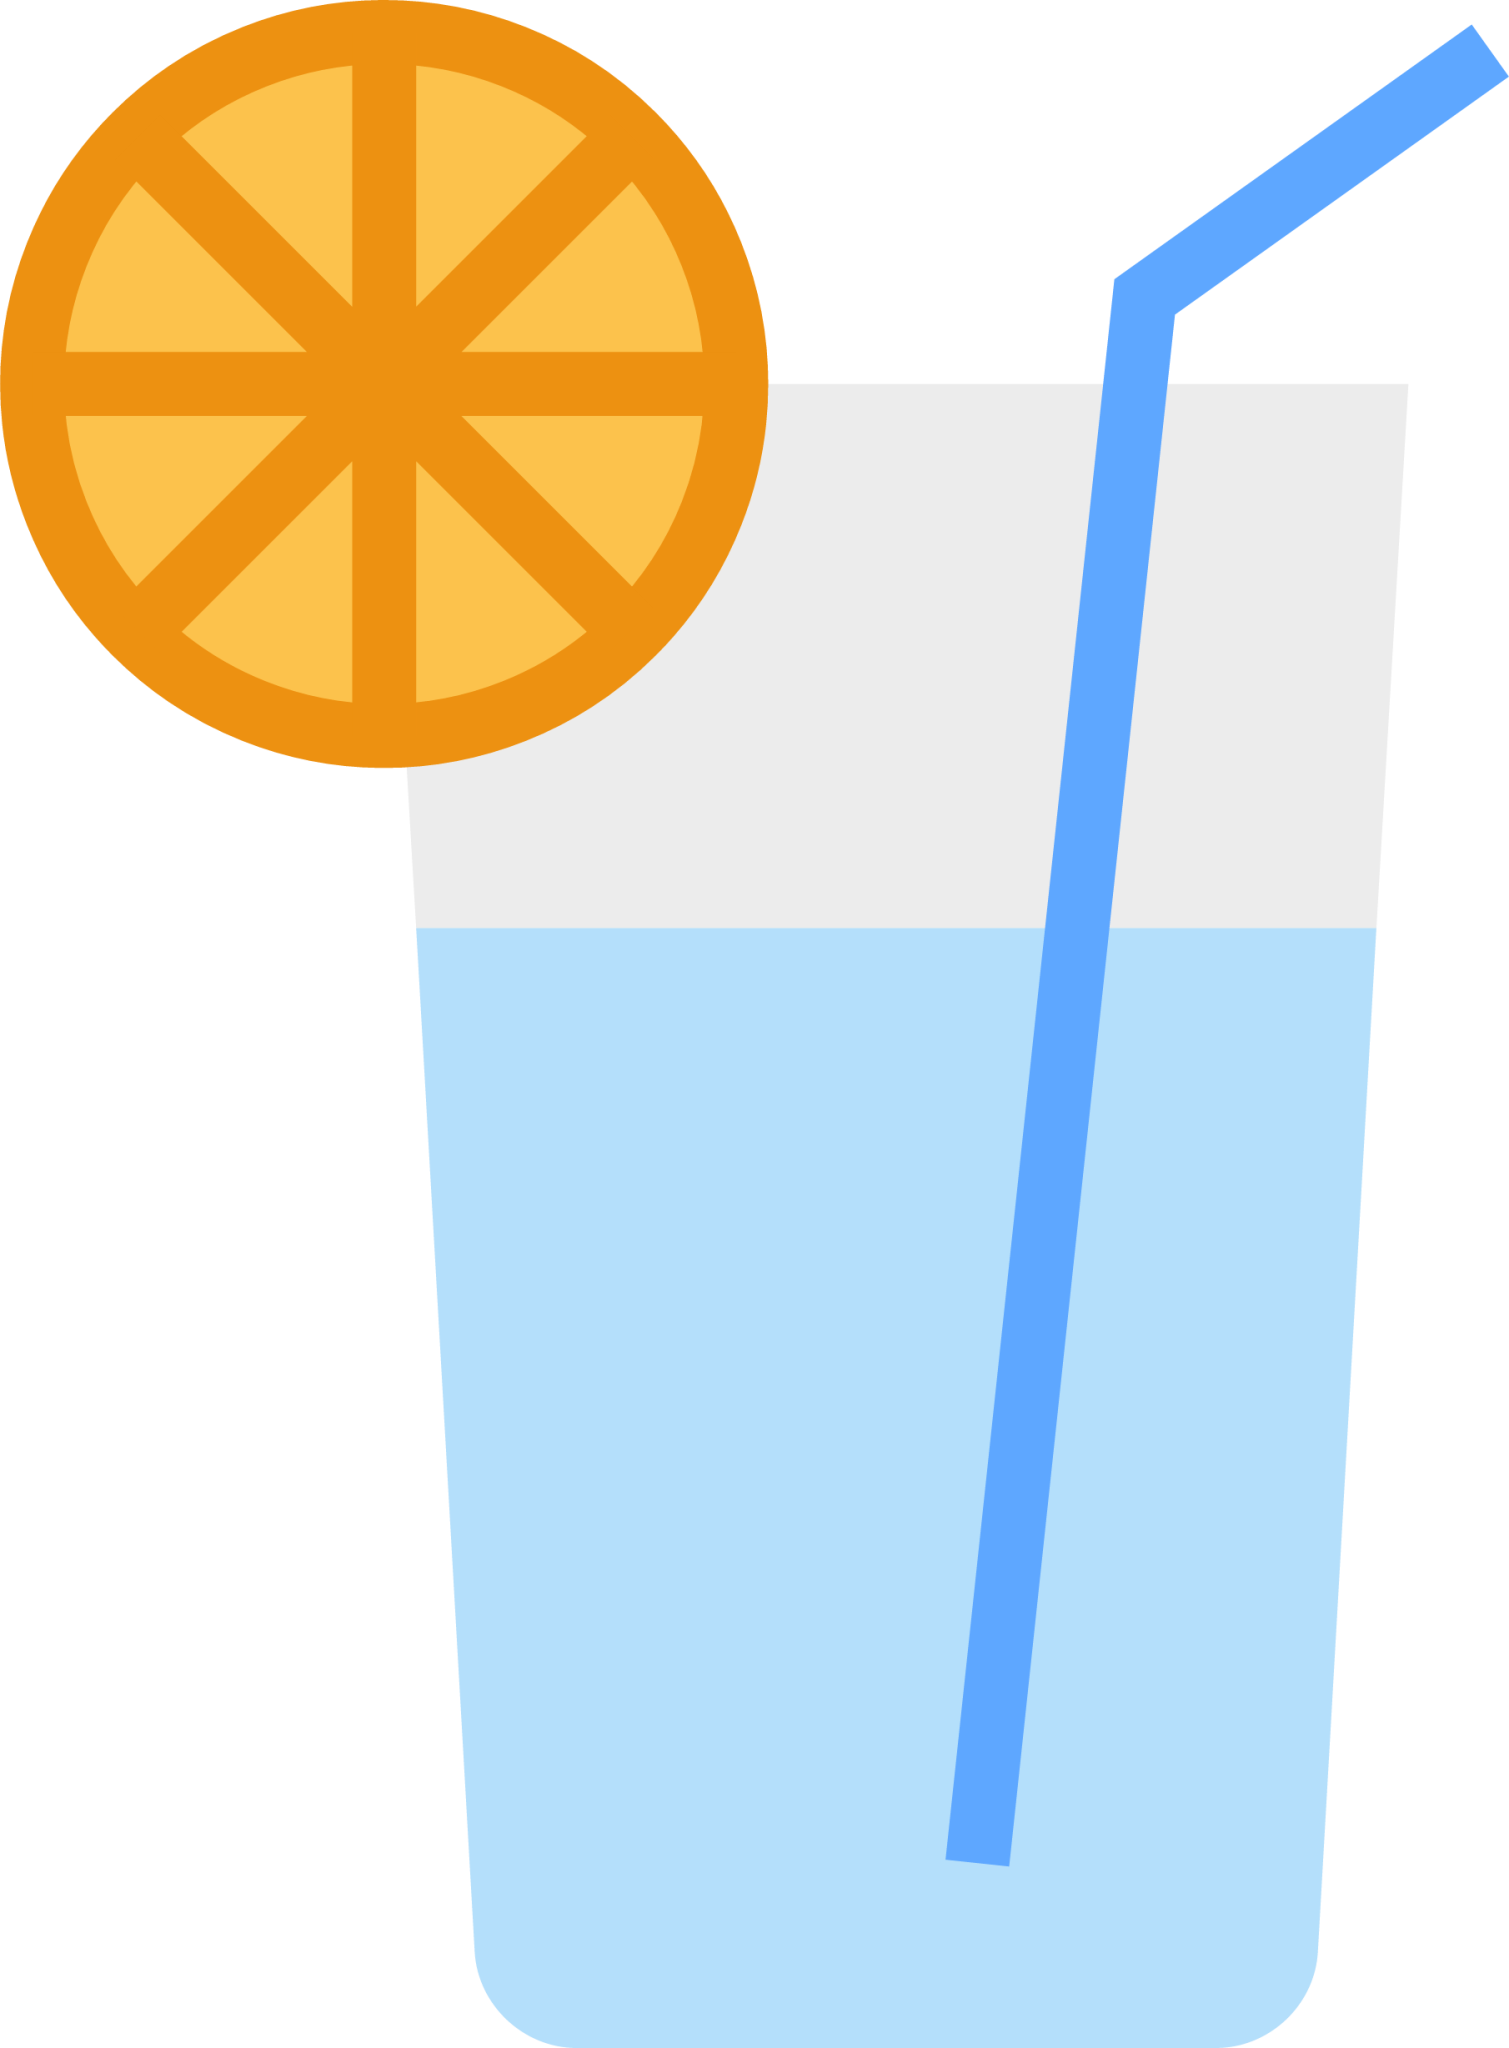 lemonade with slice and water straw icon